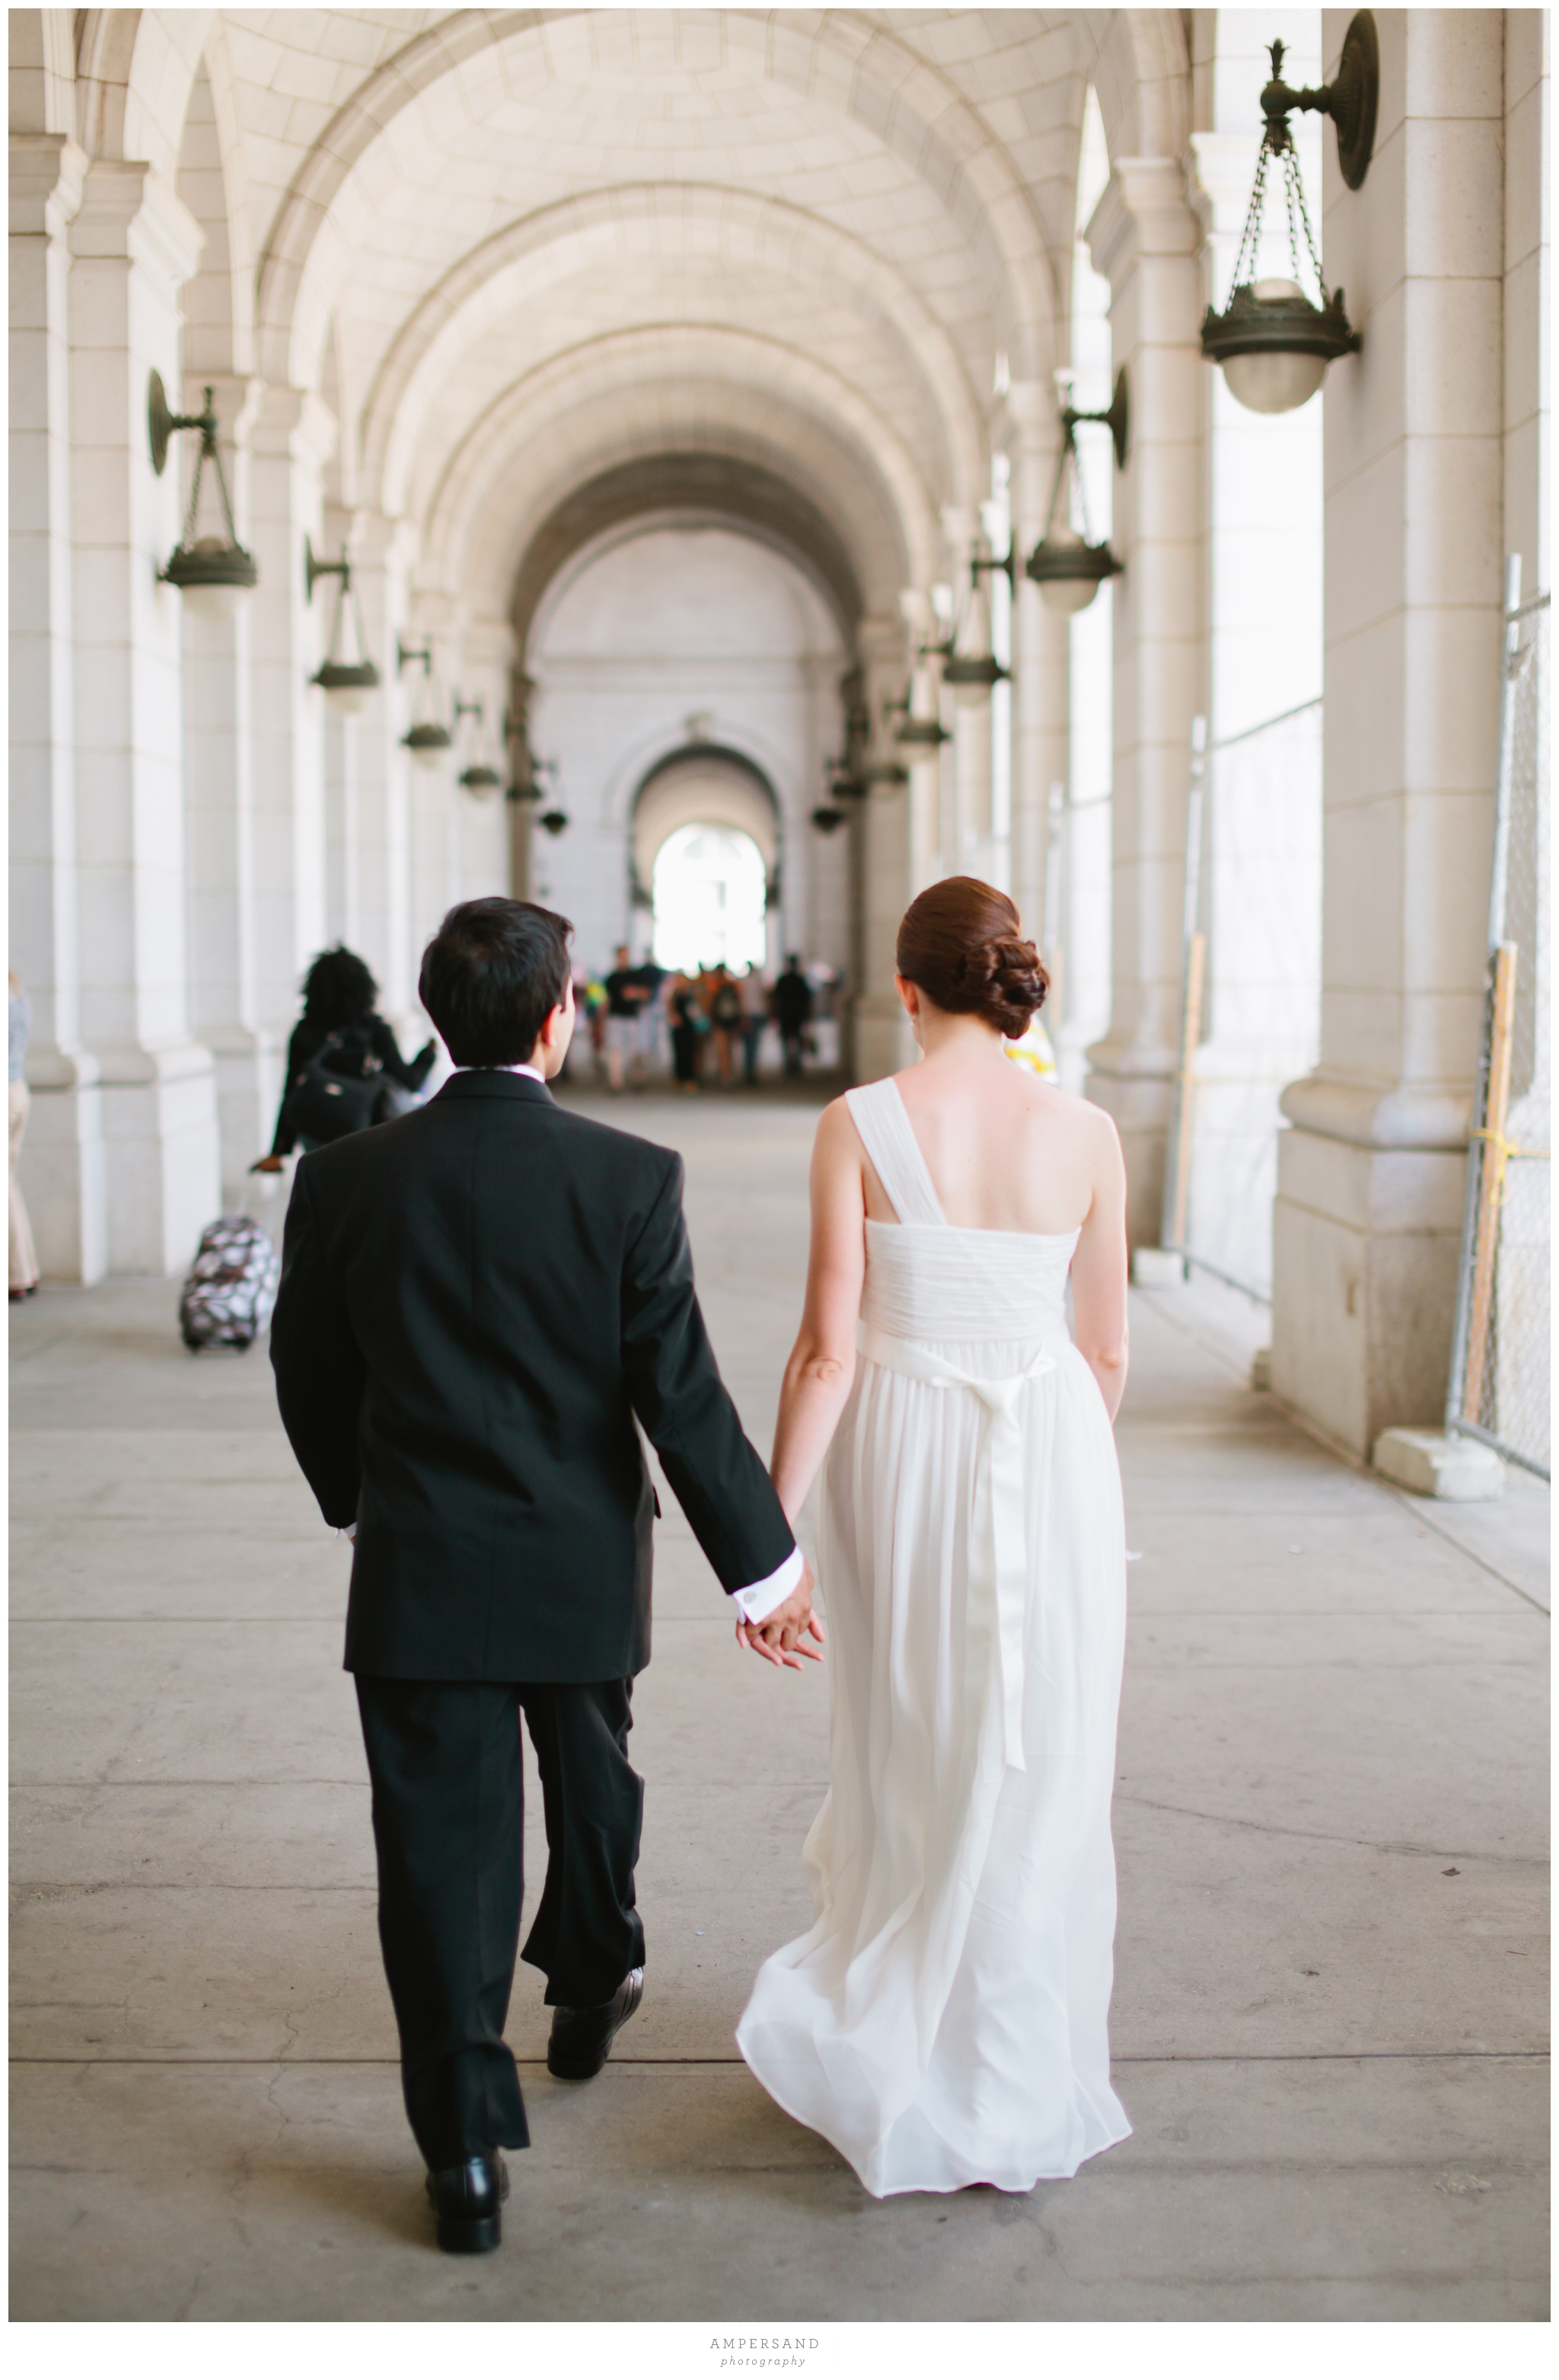 Union Station wedding portraits  // Photos by Ampersand Photography